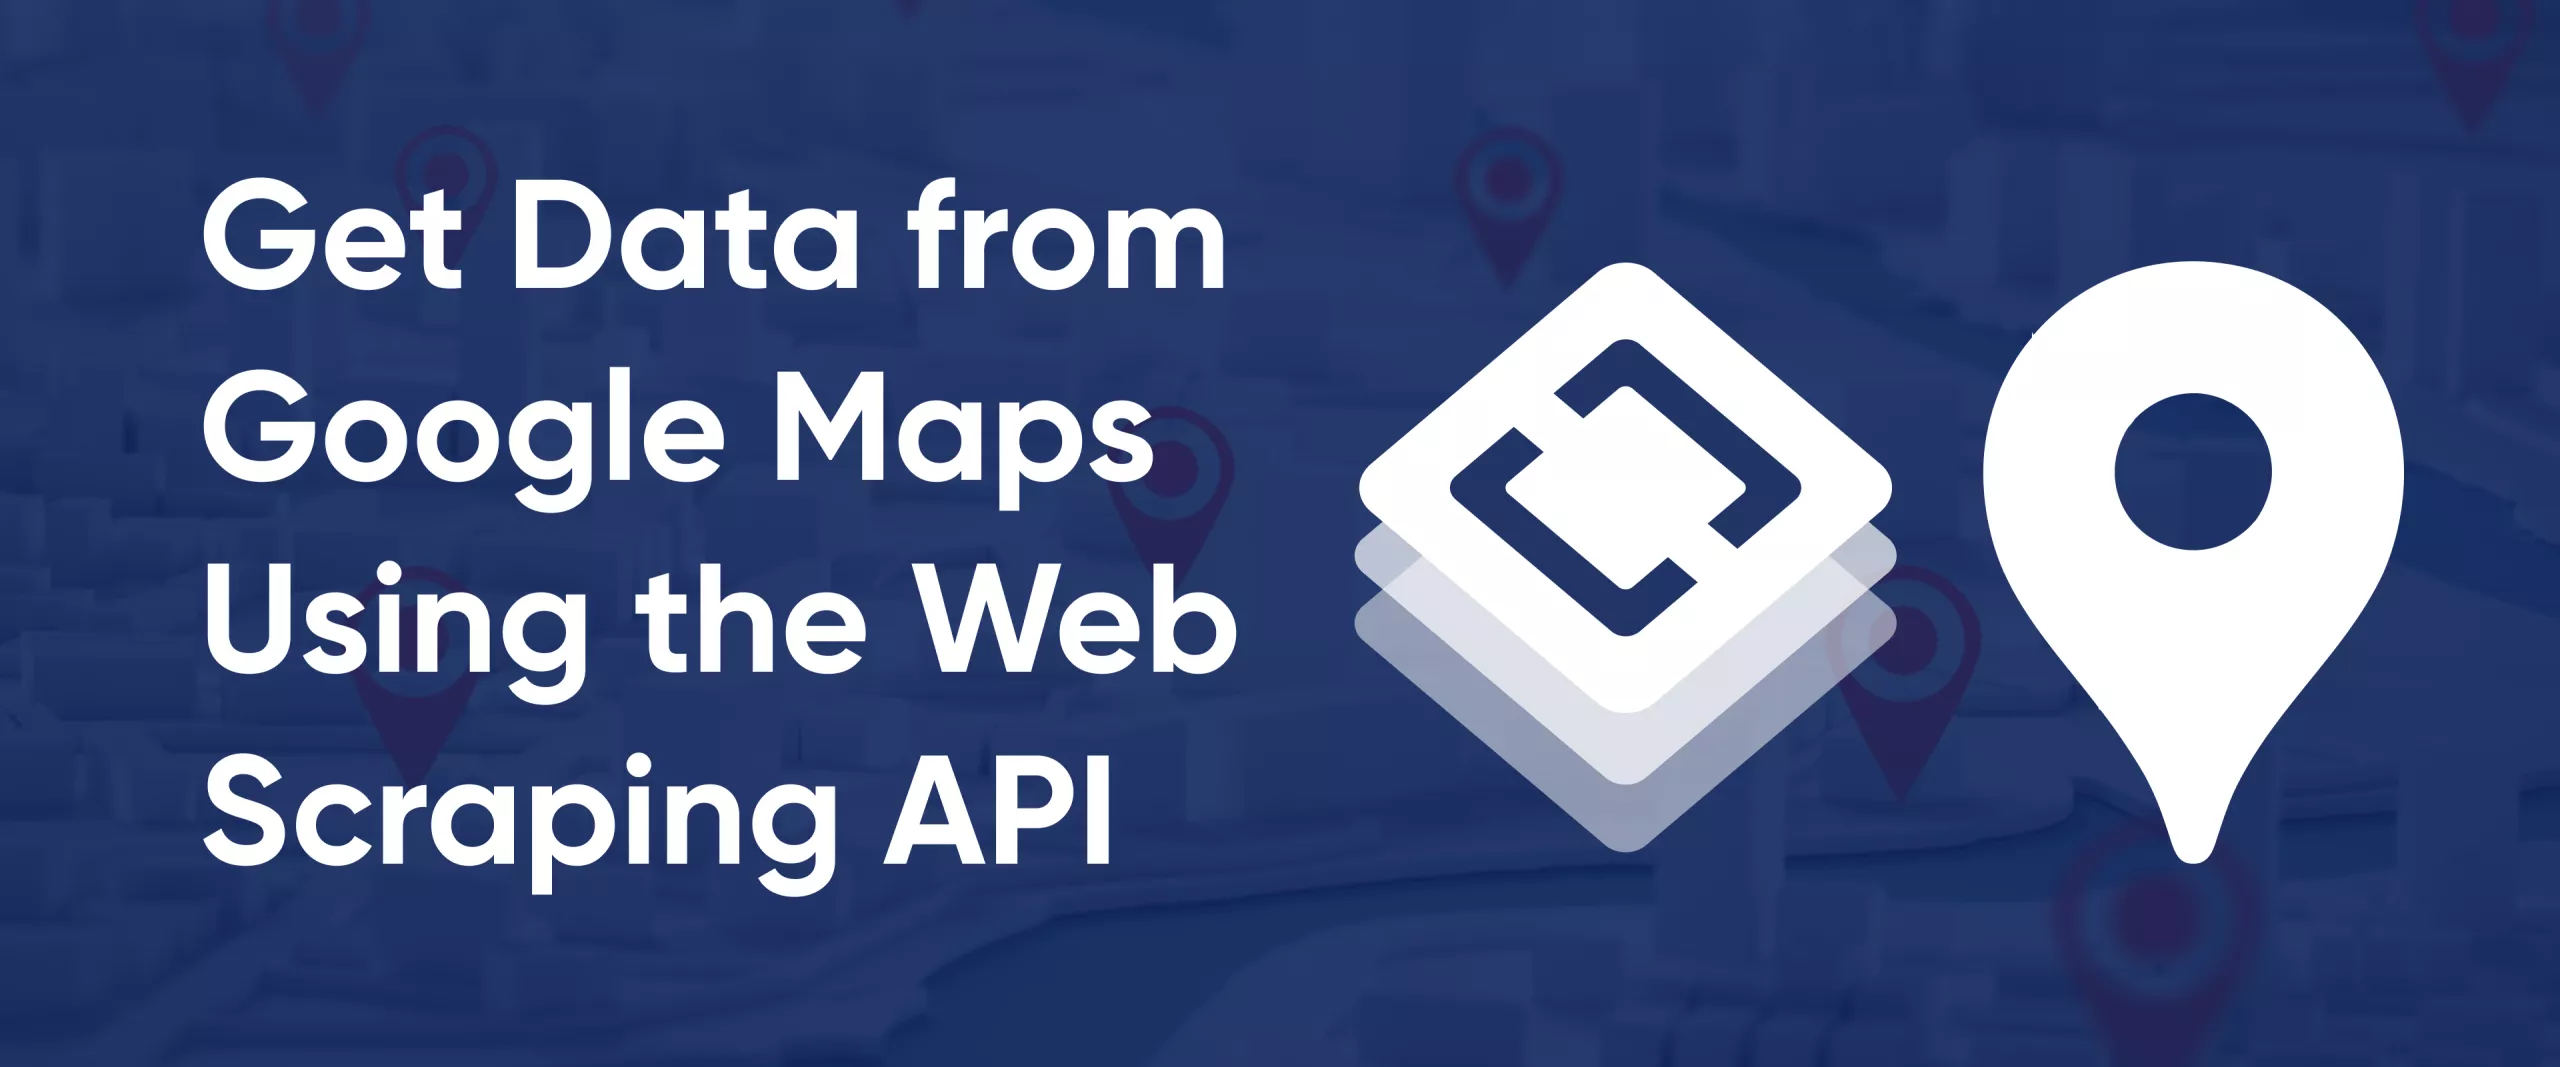 How to Get Data from Google Maps in Three Simple Steps Using the Web Scraping API